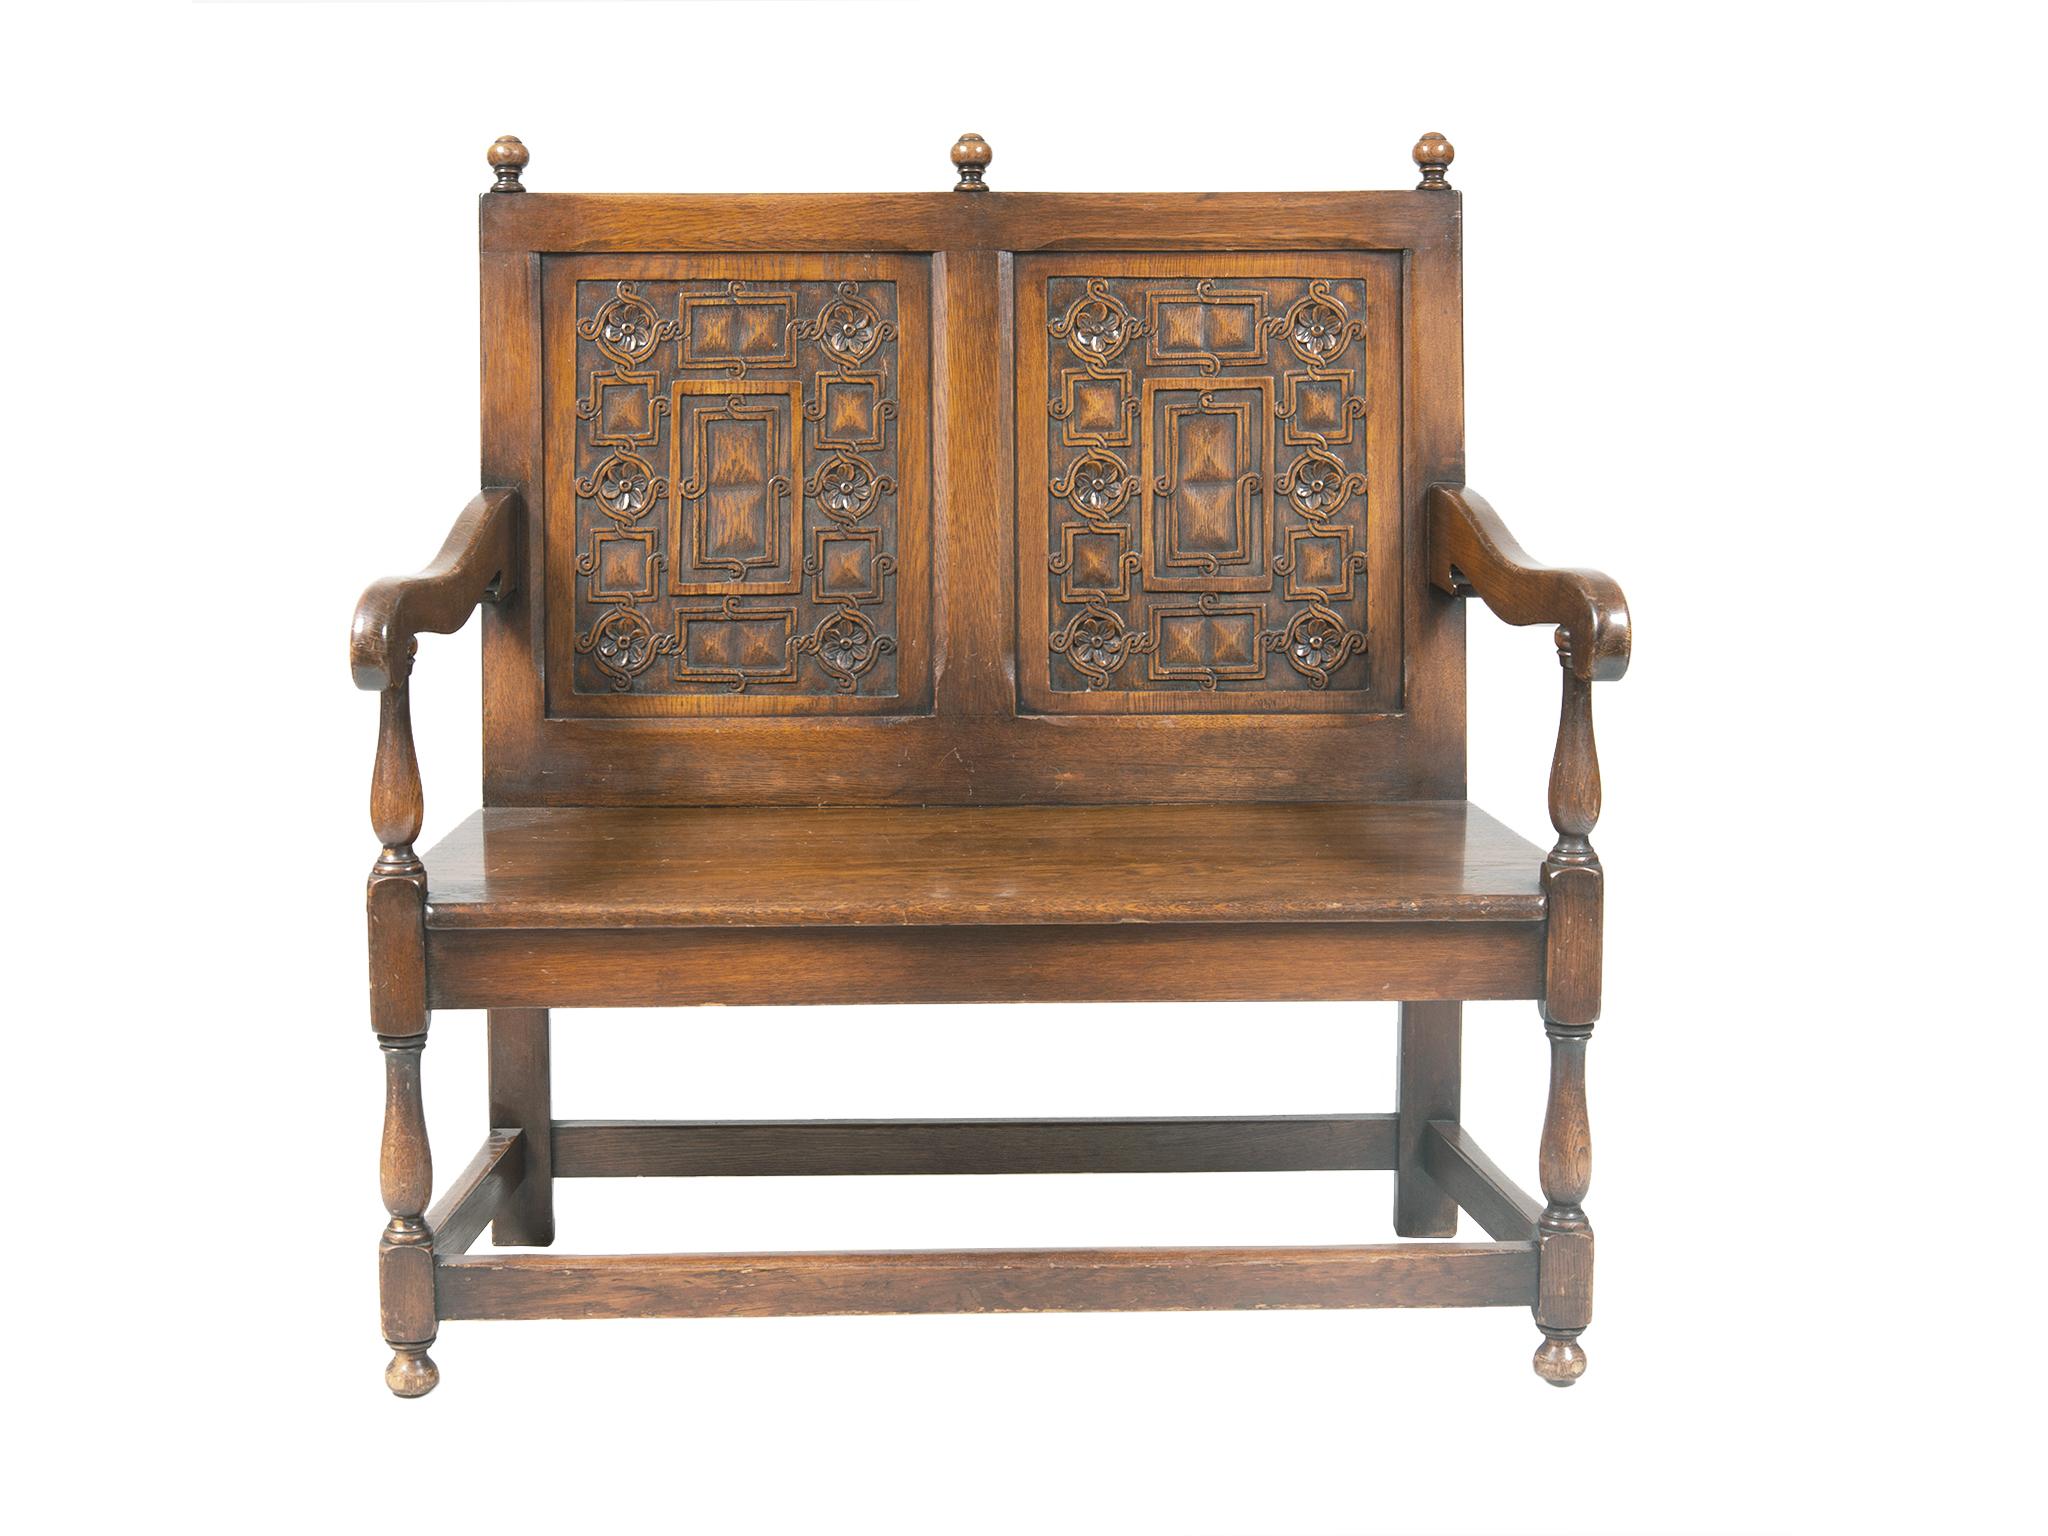 This Dutch settee was handcrafted in the late 19th-early 20th century and once furnished the New York Stock Exchange. It is comprised of oak wood with a warm red-brown tone. The wood is beautifully carved with a floral and geometric design on the